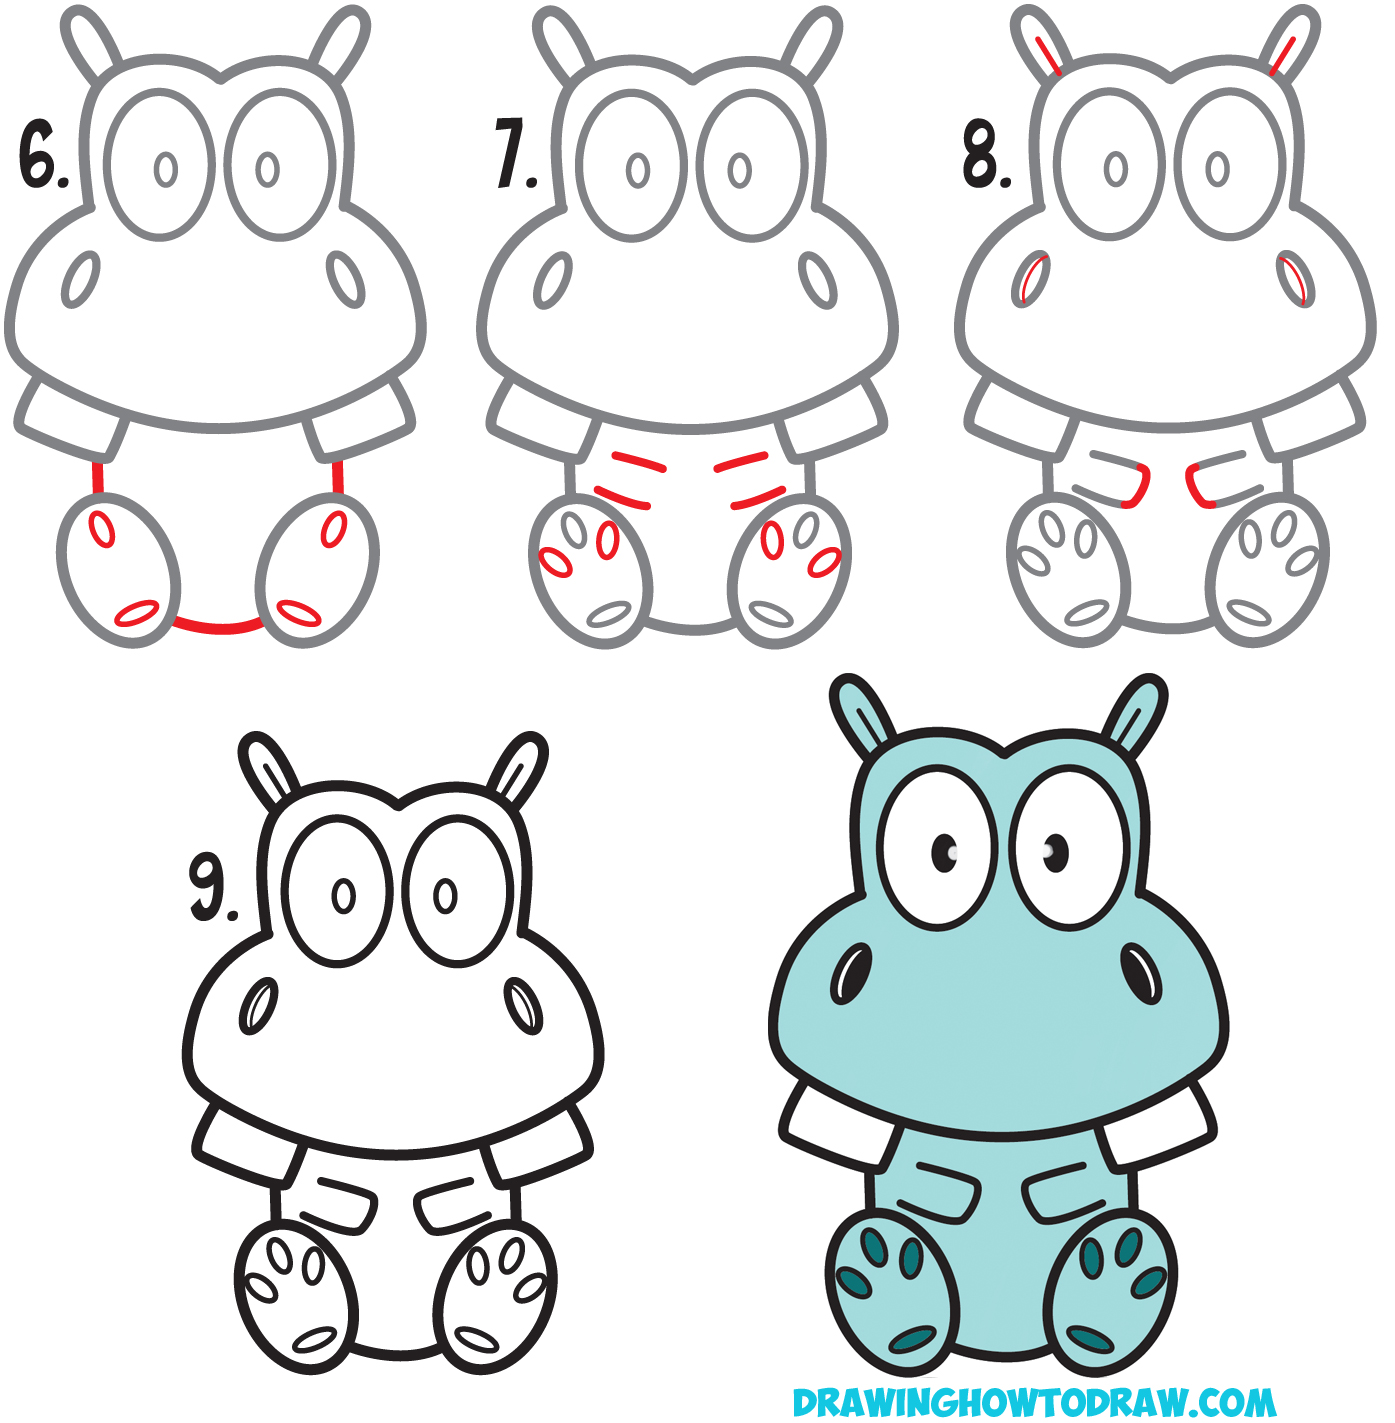 How to Draw a Cute Cartoon Hippo Simple Steps Drawing Lesson for